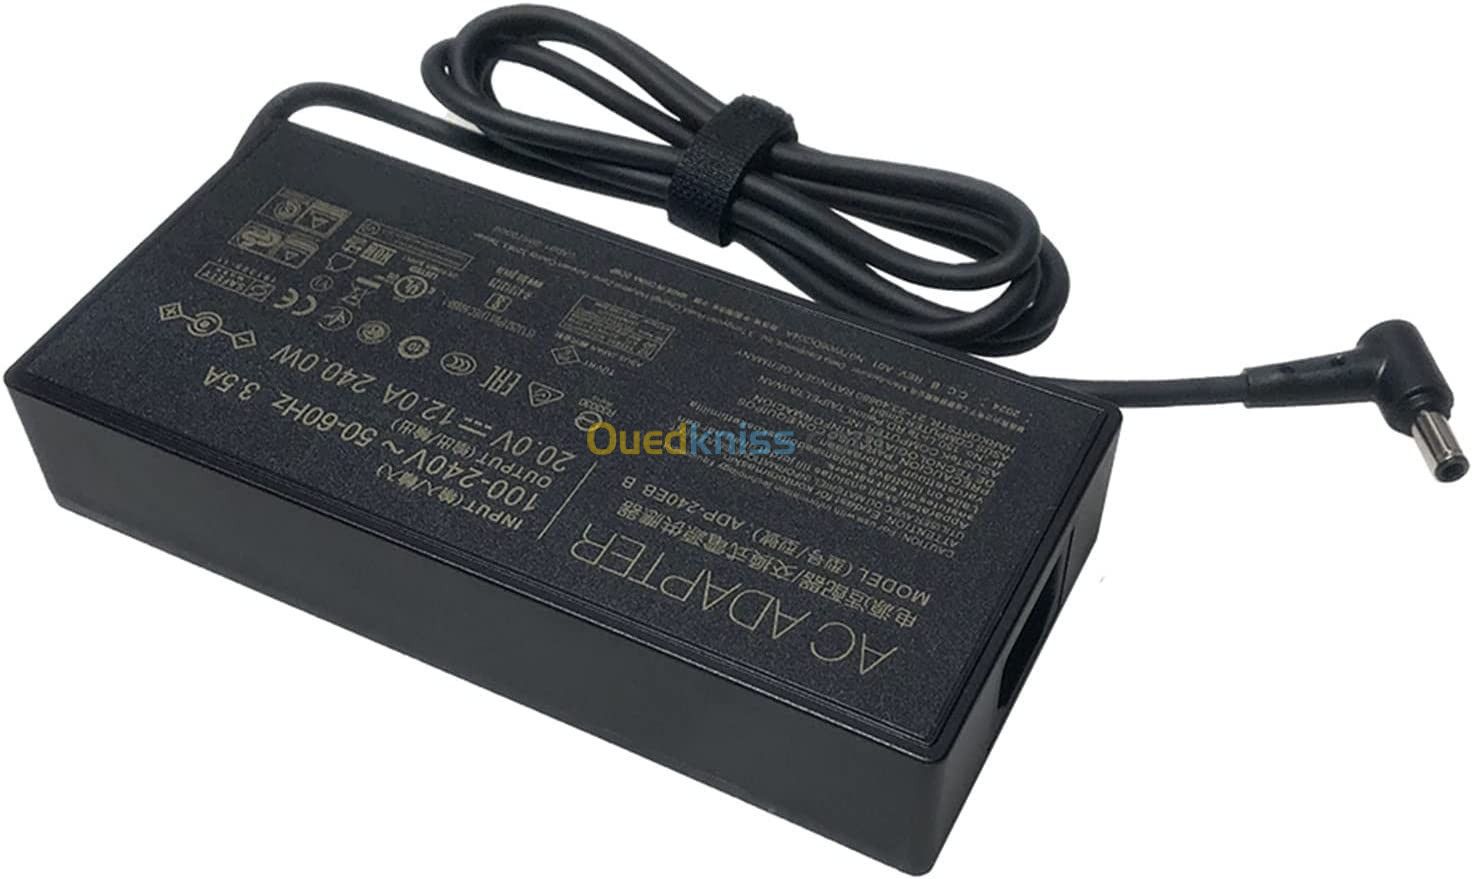 CHARGEUR ASUS 20V 12A 240WH FICHE TOSHIBA / PIN ORIGINAL